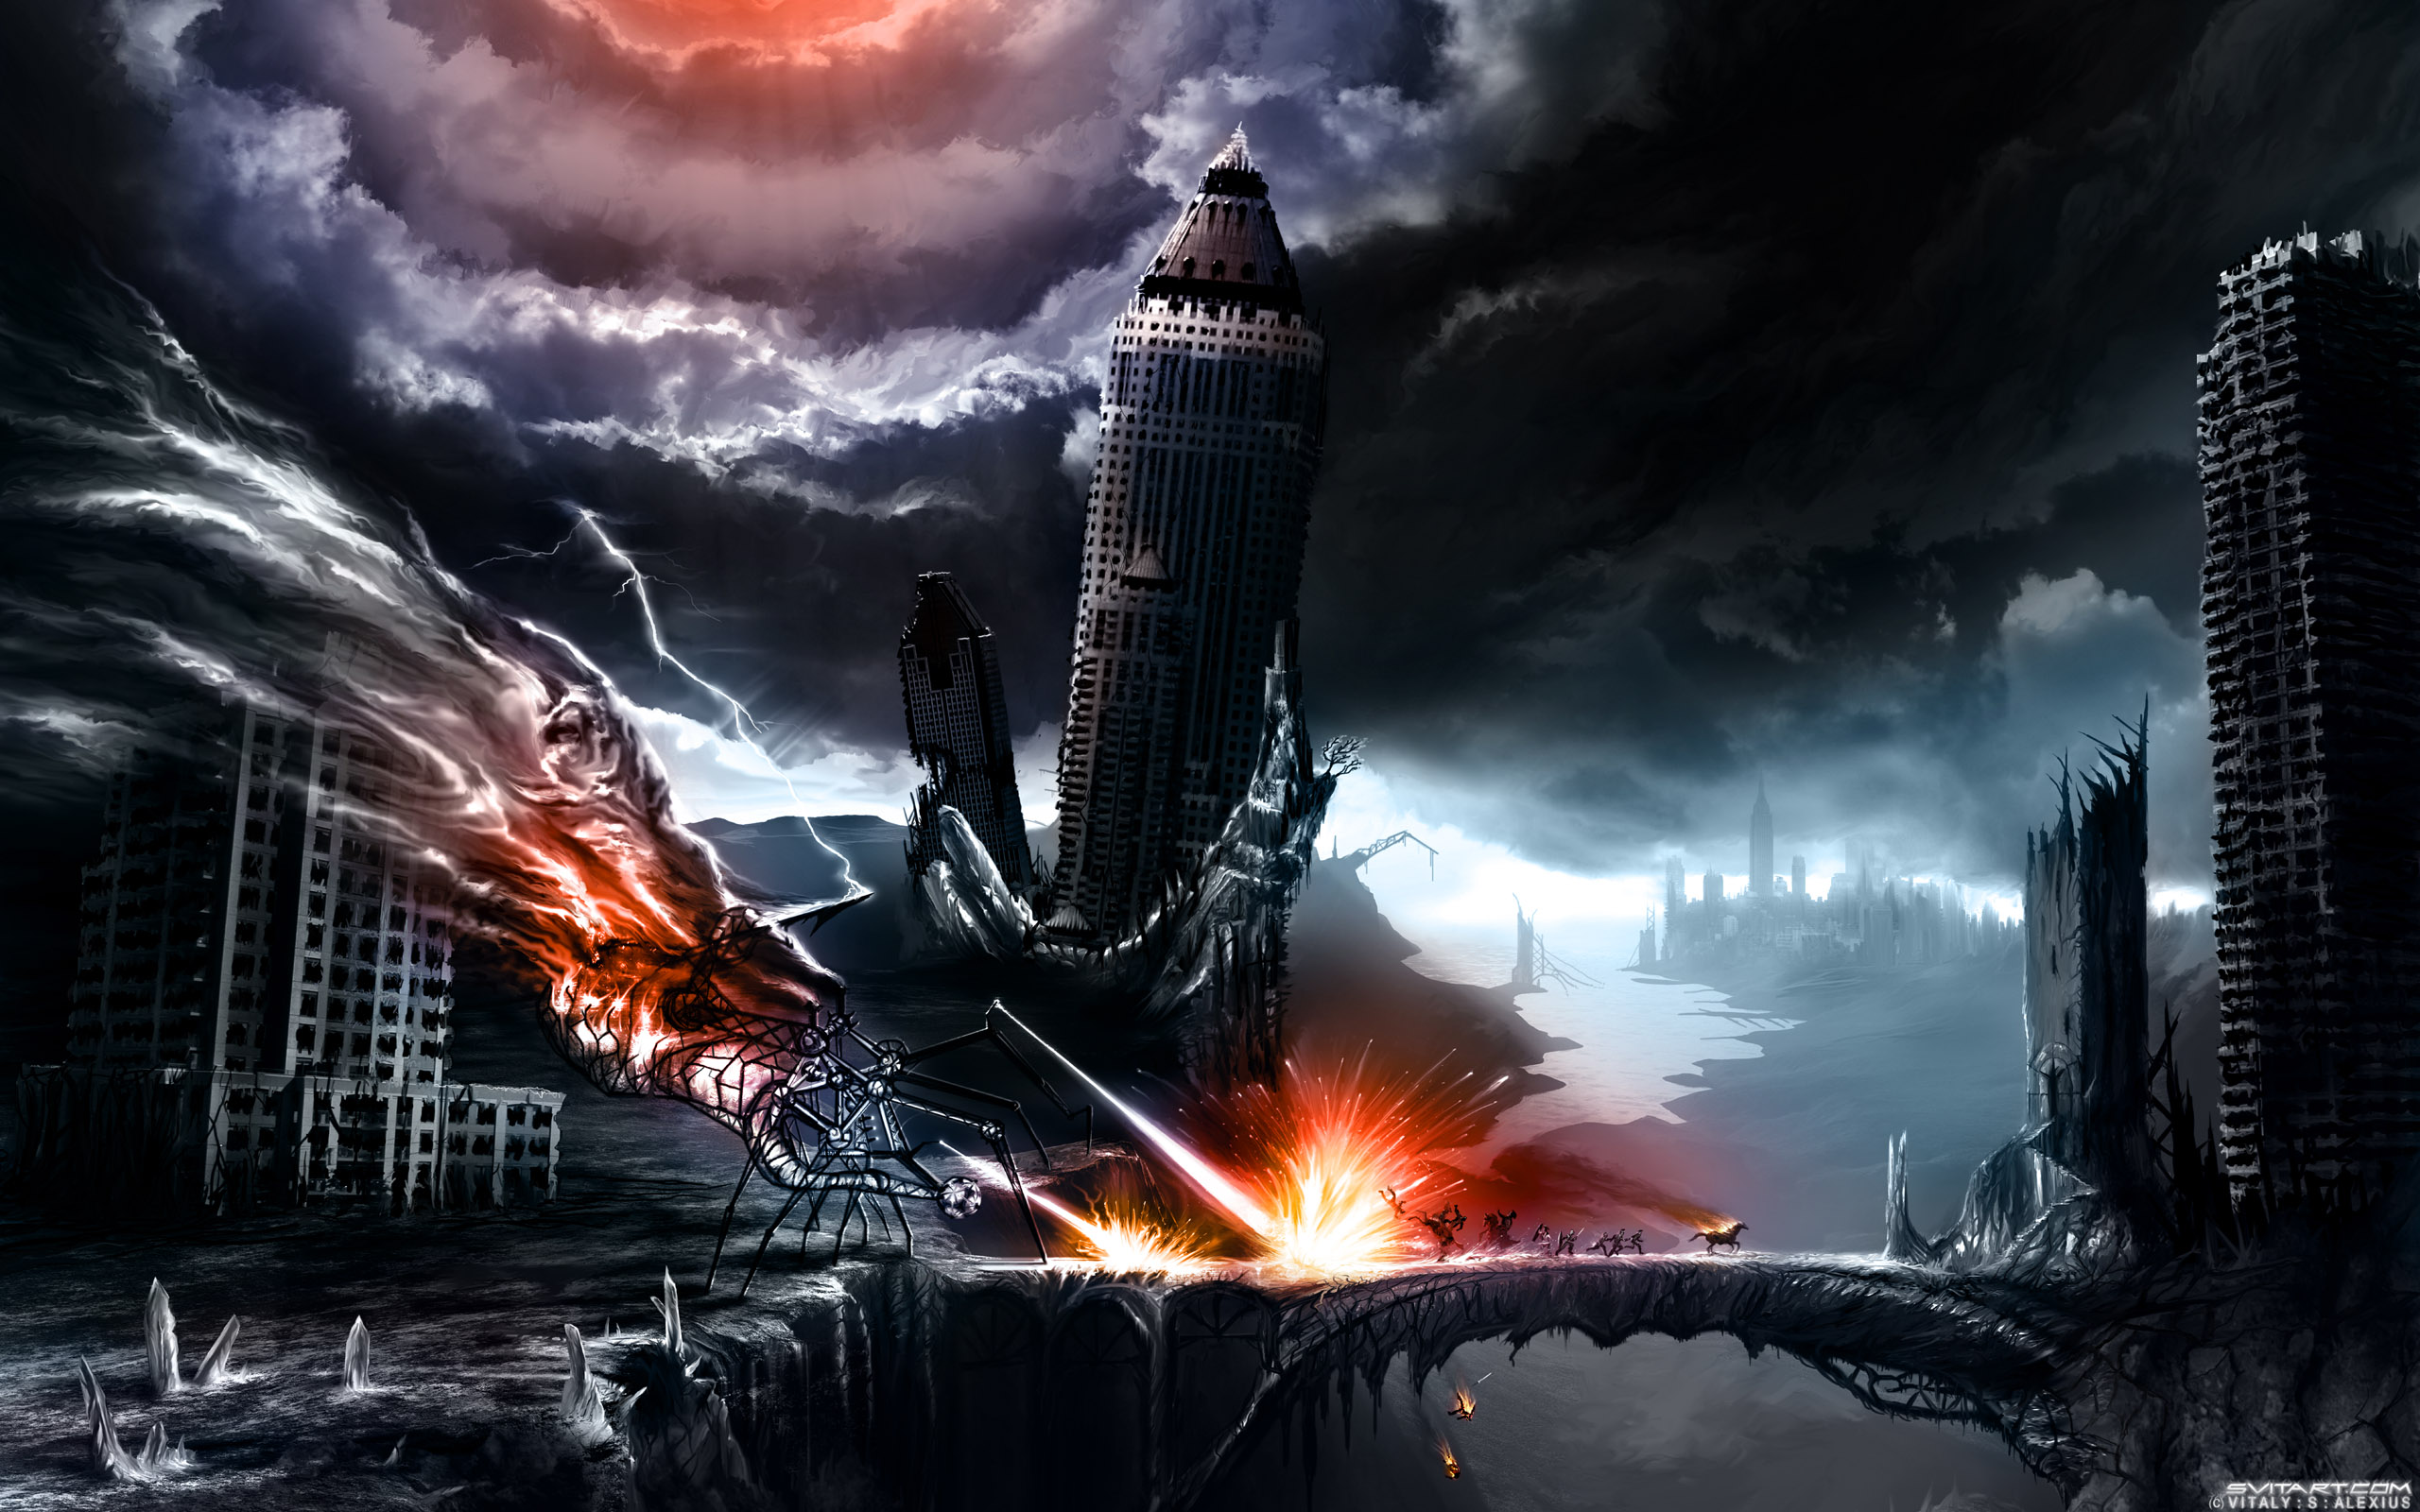 monsters, post-apocalyptic, bridges, The Lord of the Rings, fantasy art, horses, skyscrapers, digital art, sparks, running, crossovers, modern, apocalyptic, Romantically Apocalyptic, Vitaly S Alexius, Moria - desktop wallpaper